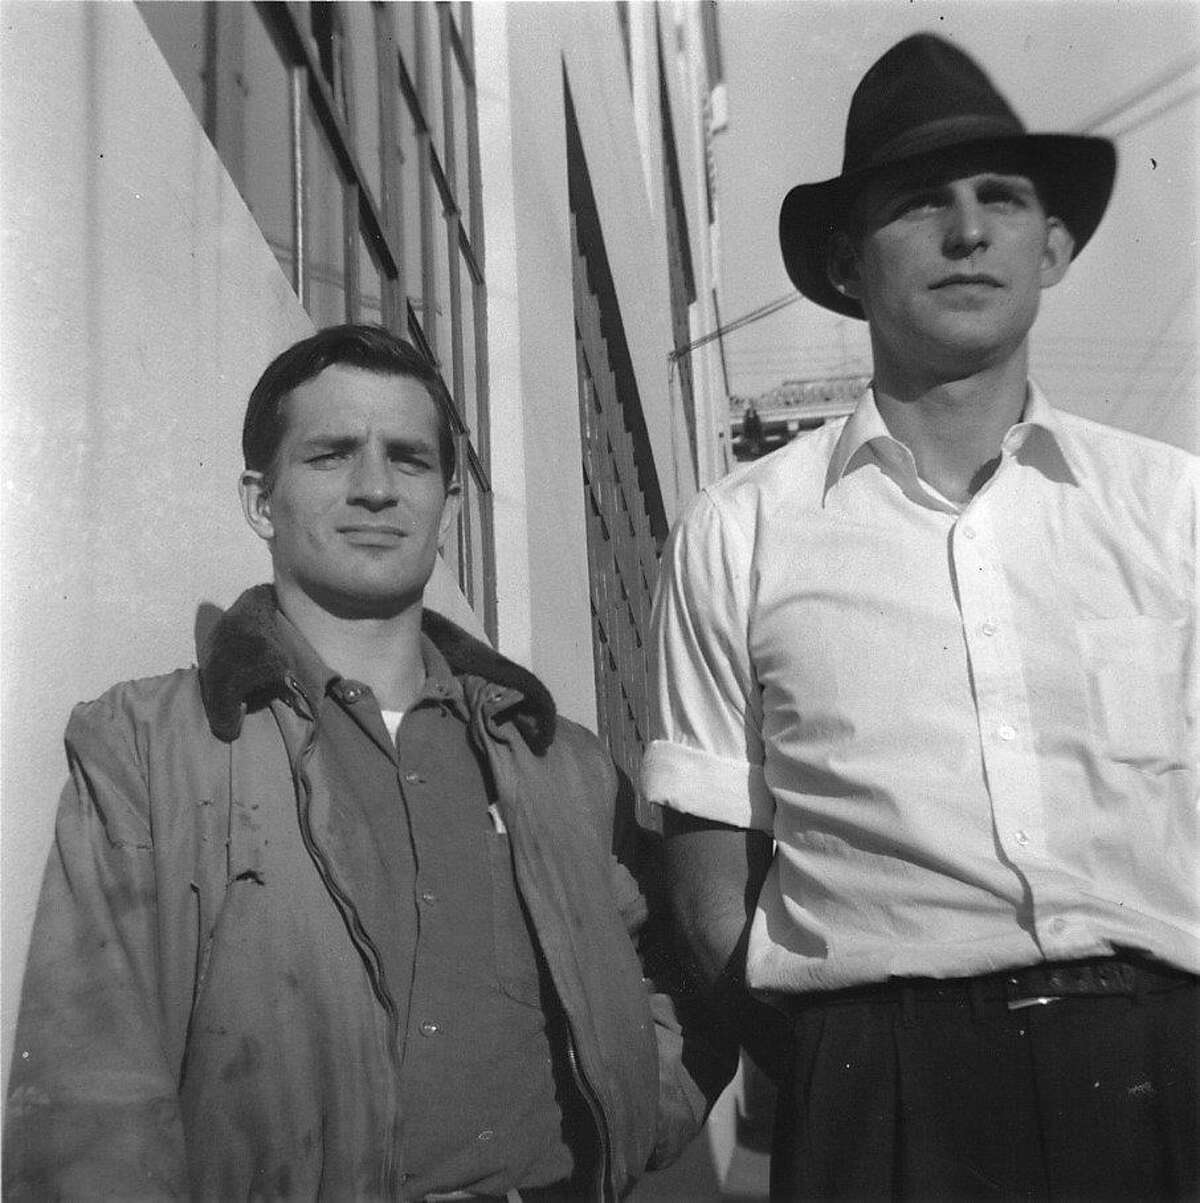 Al Hinkle (right) with Jack Kerouac in an undated photo